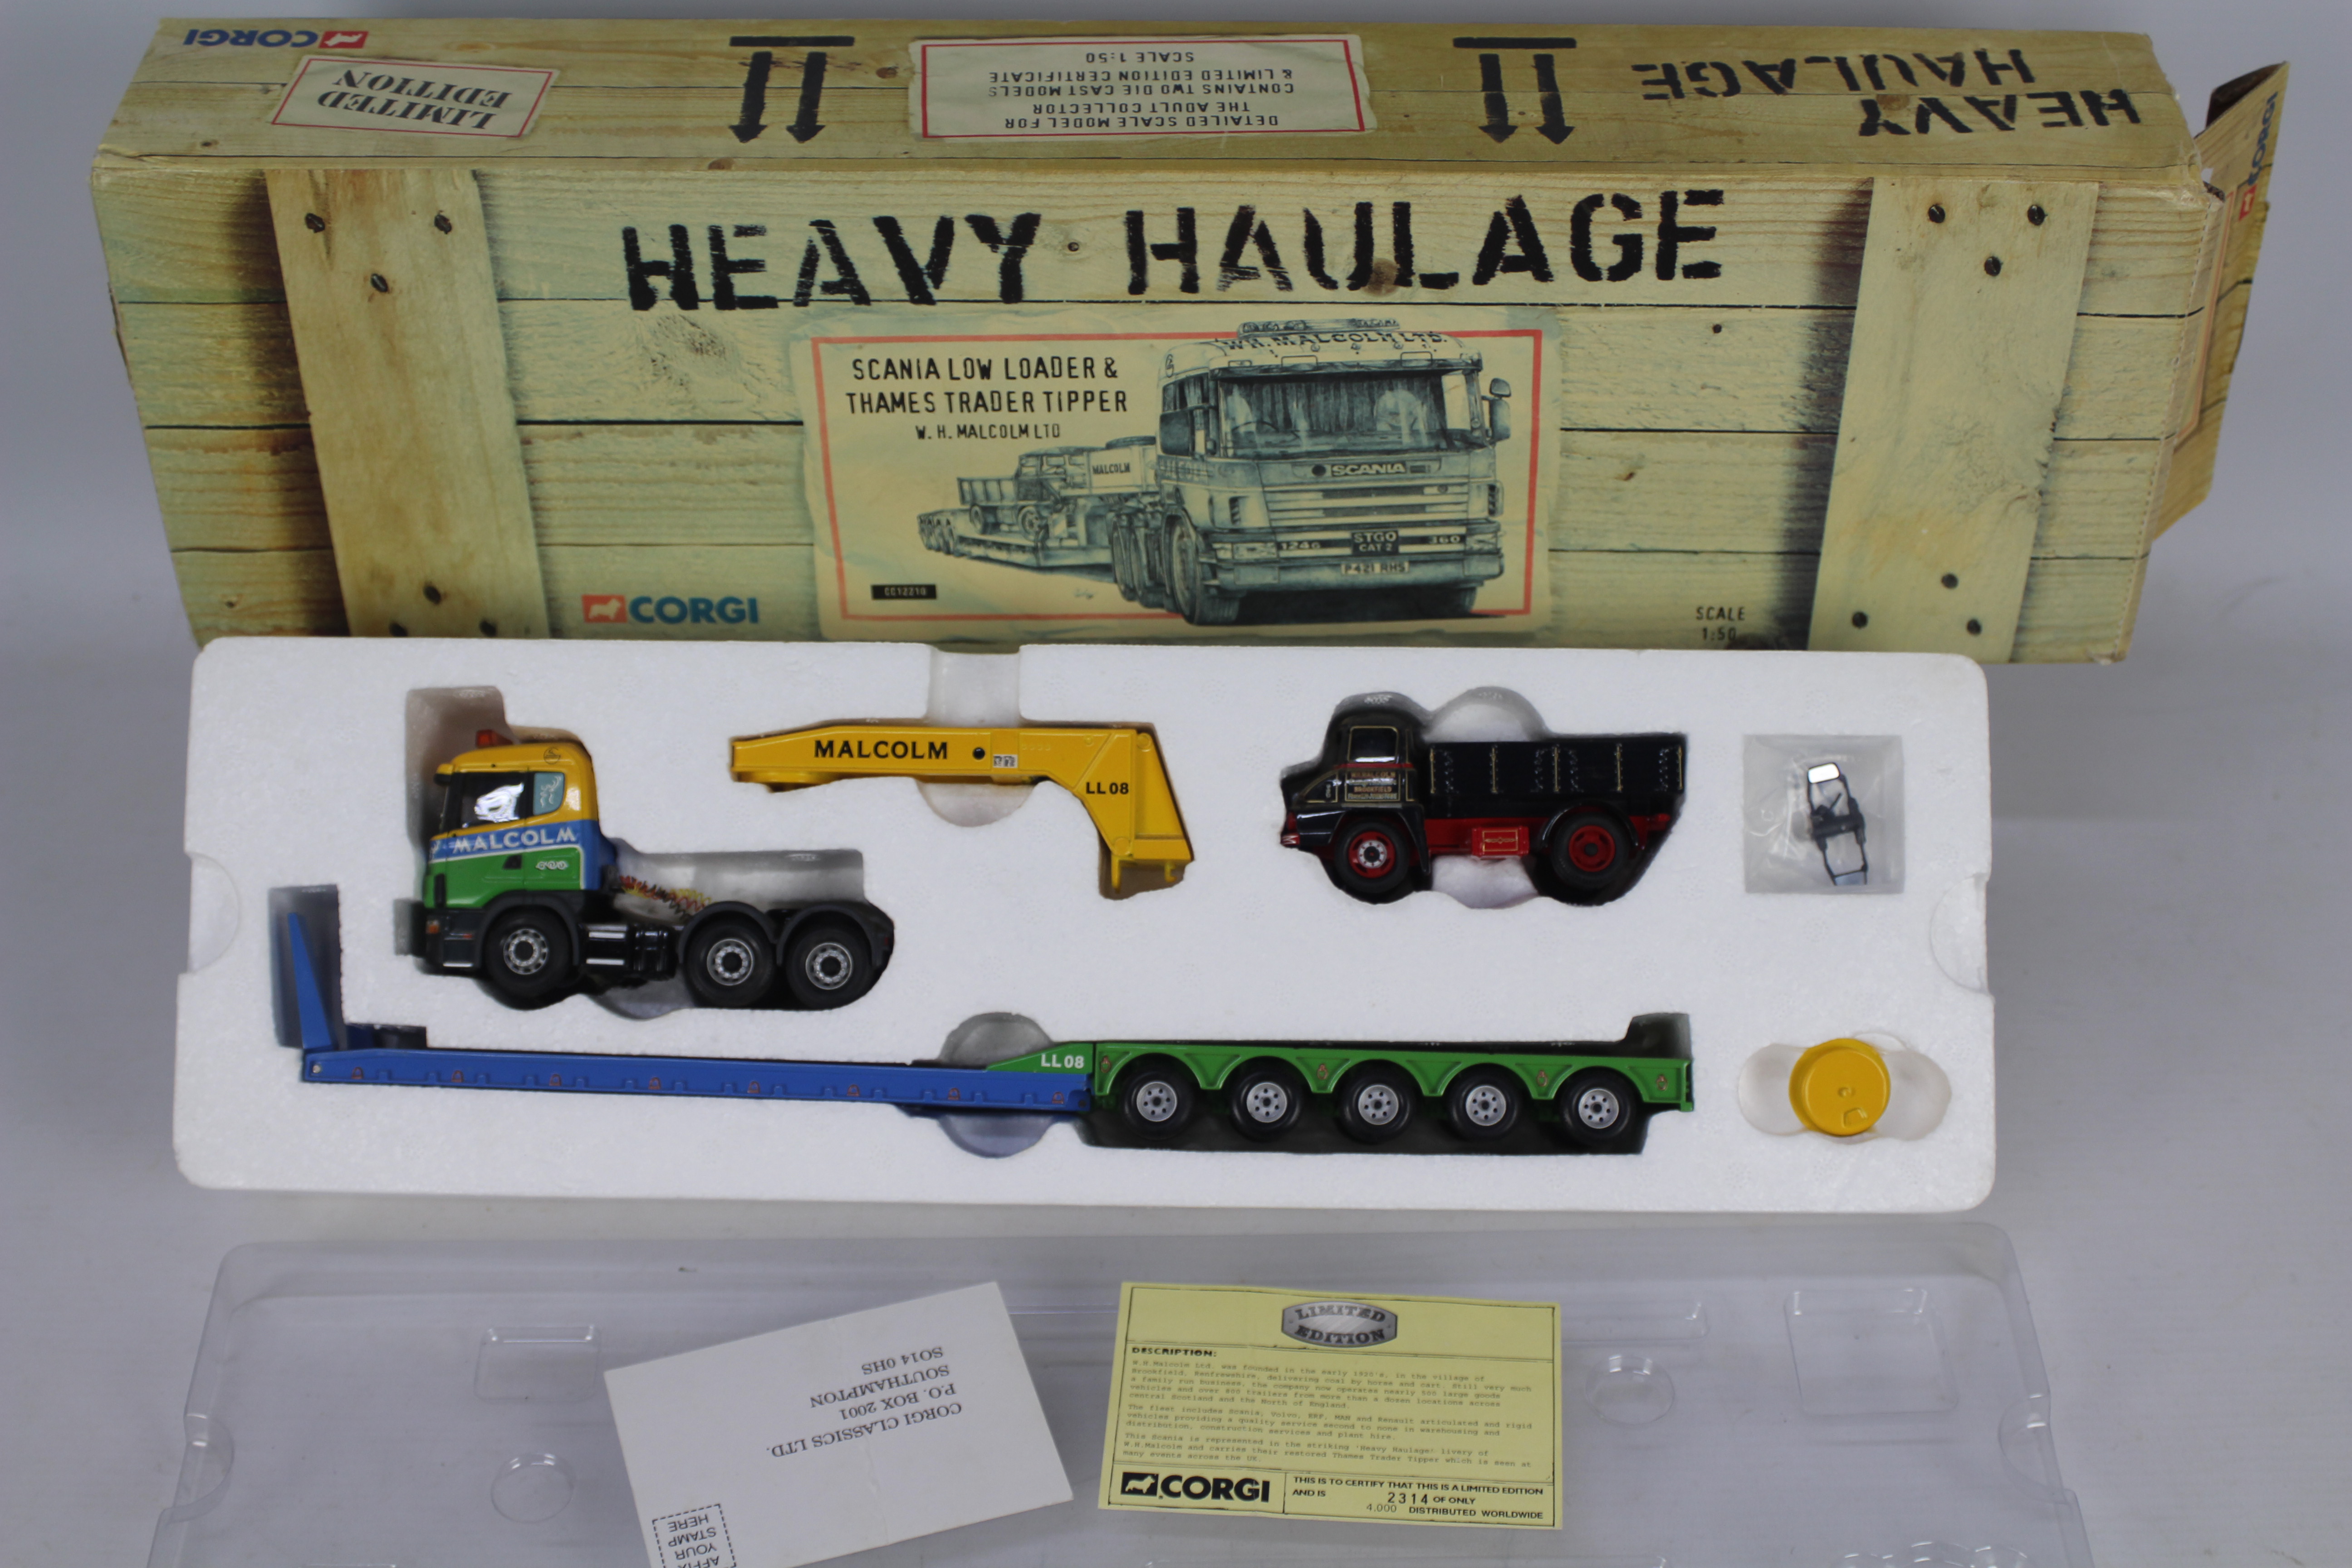 Corgi - Heavy Haulage - A boxed limited edition Scania Low Loader and Thames Trader Tipper in W.H.